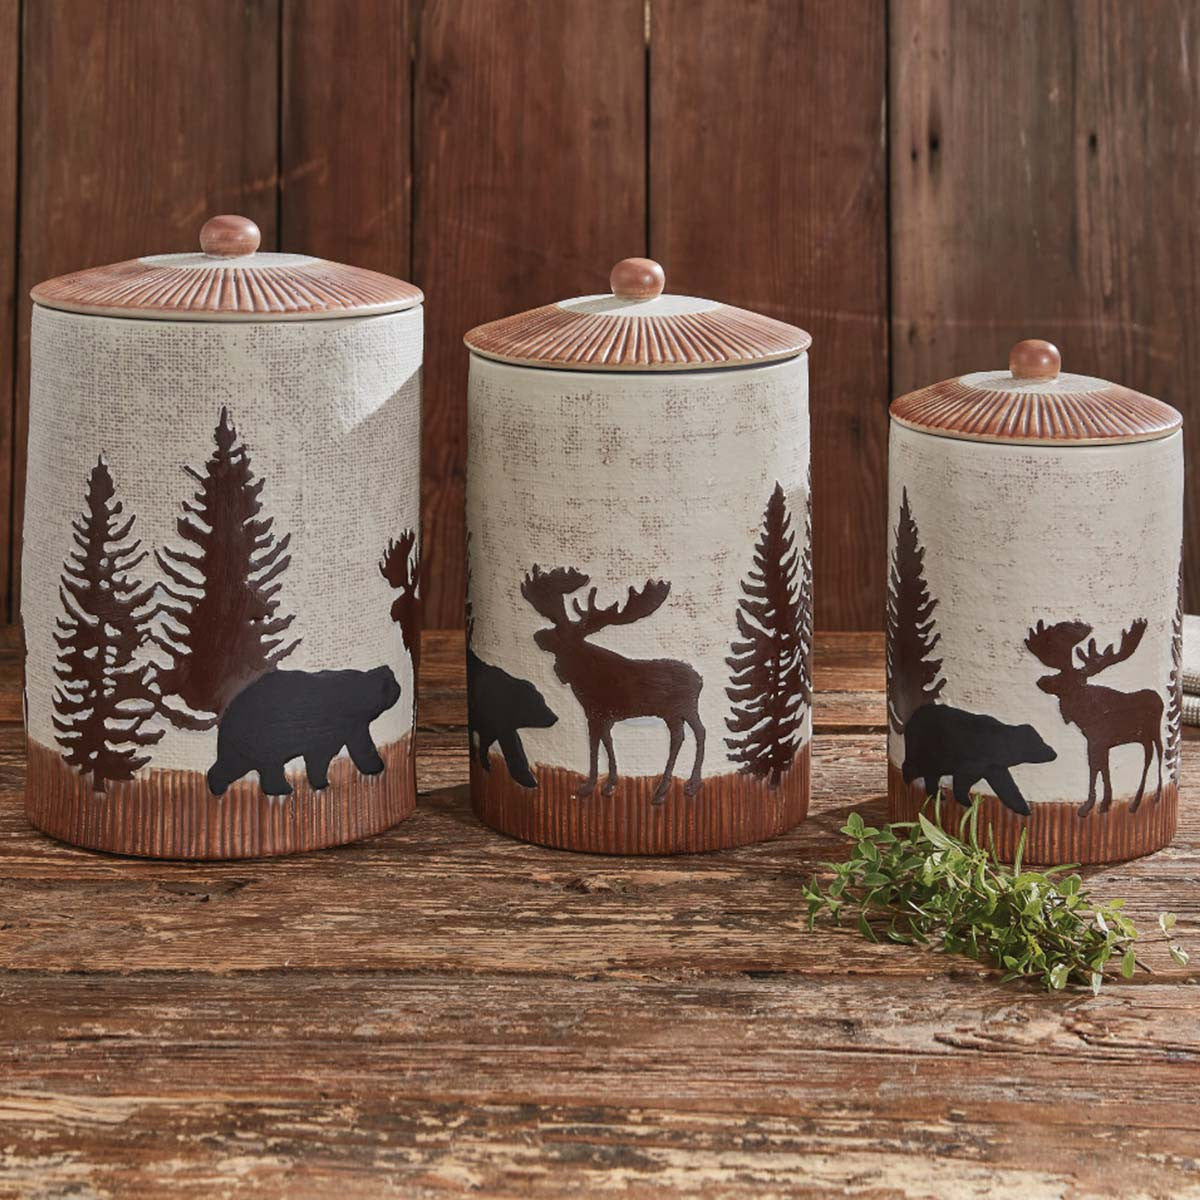 Wilderness Trail Canisters - Set of 3 Park Designs